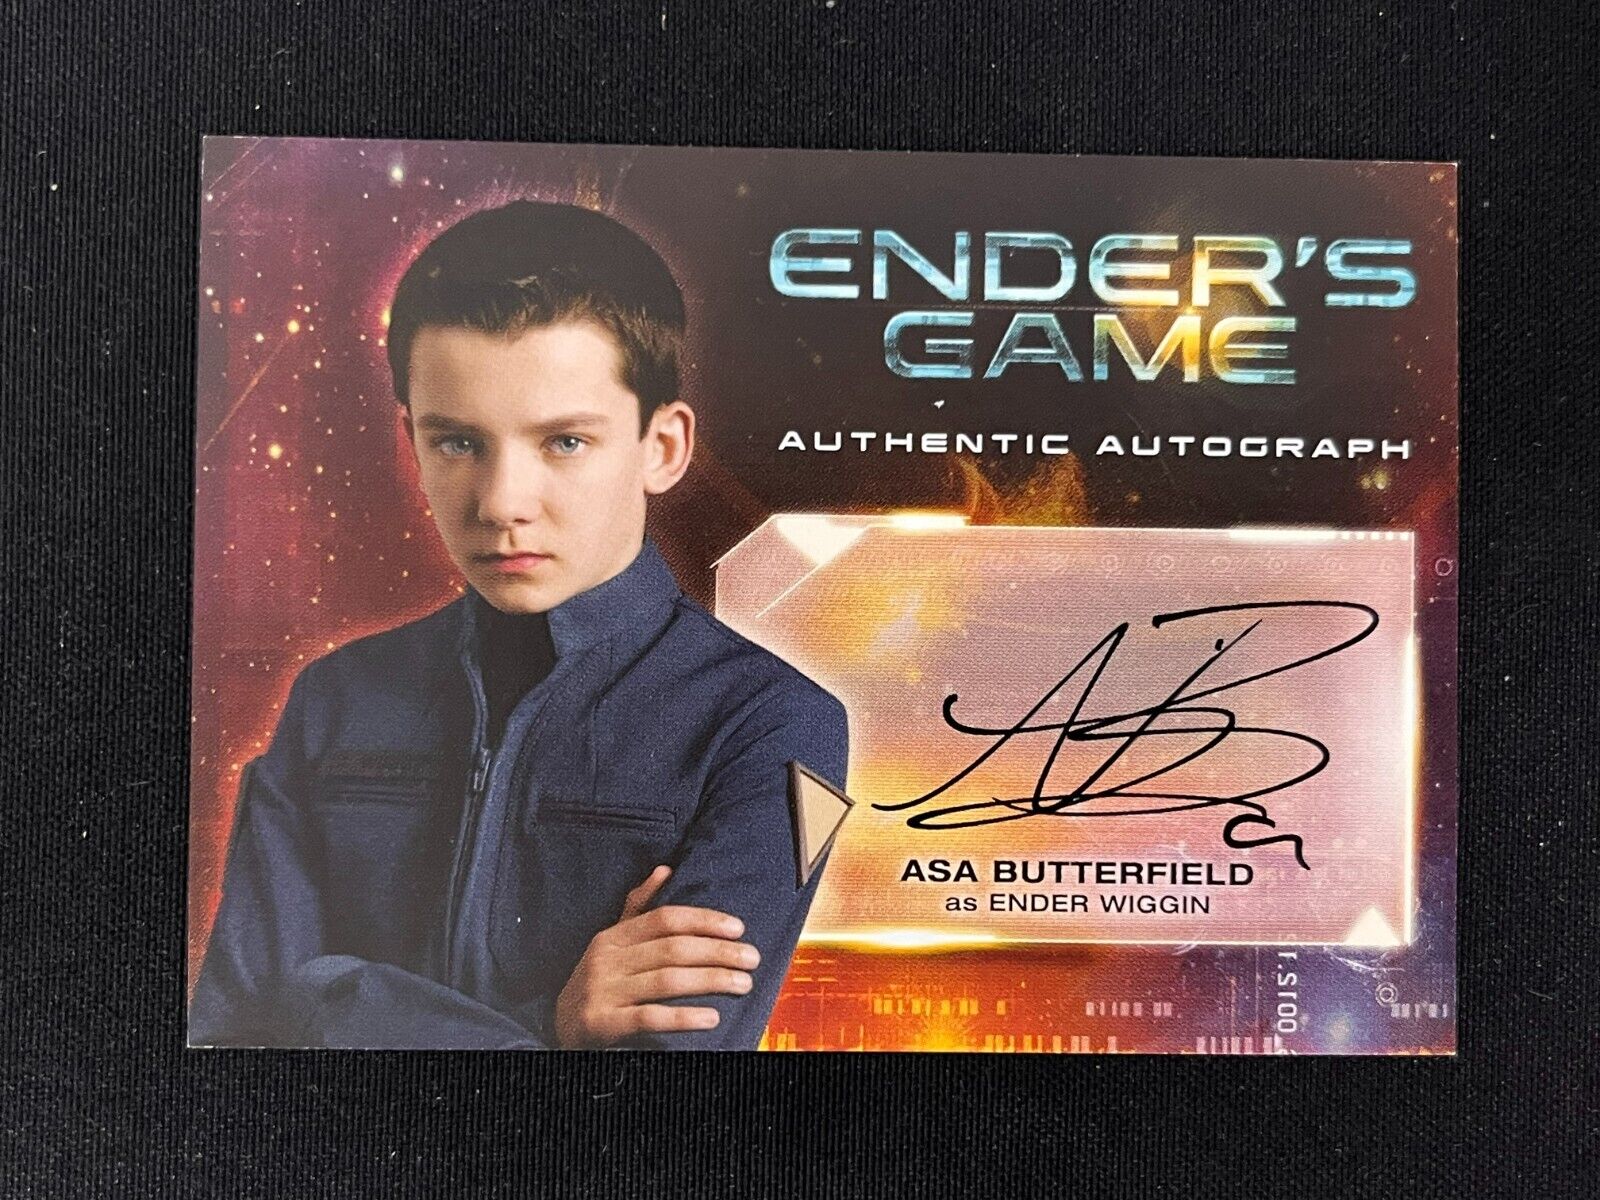 2014 Cryptozoic Ender's Game Asa Butterfield Ender Wiggin A2 Autograph Card AA